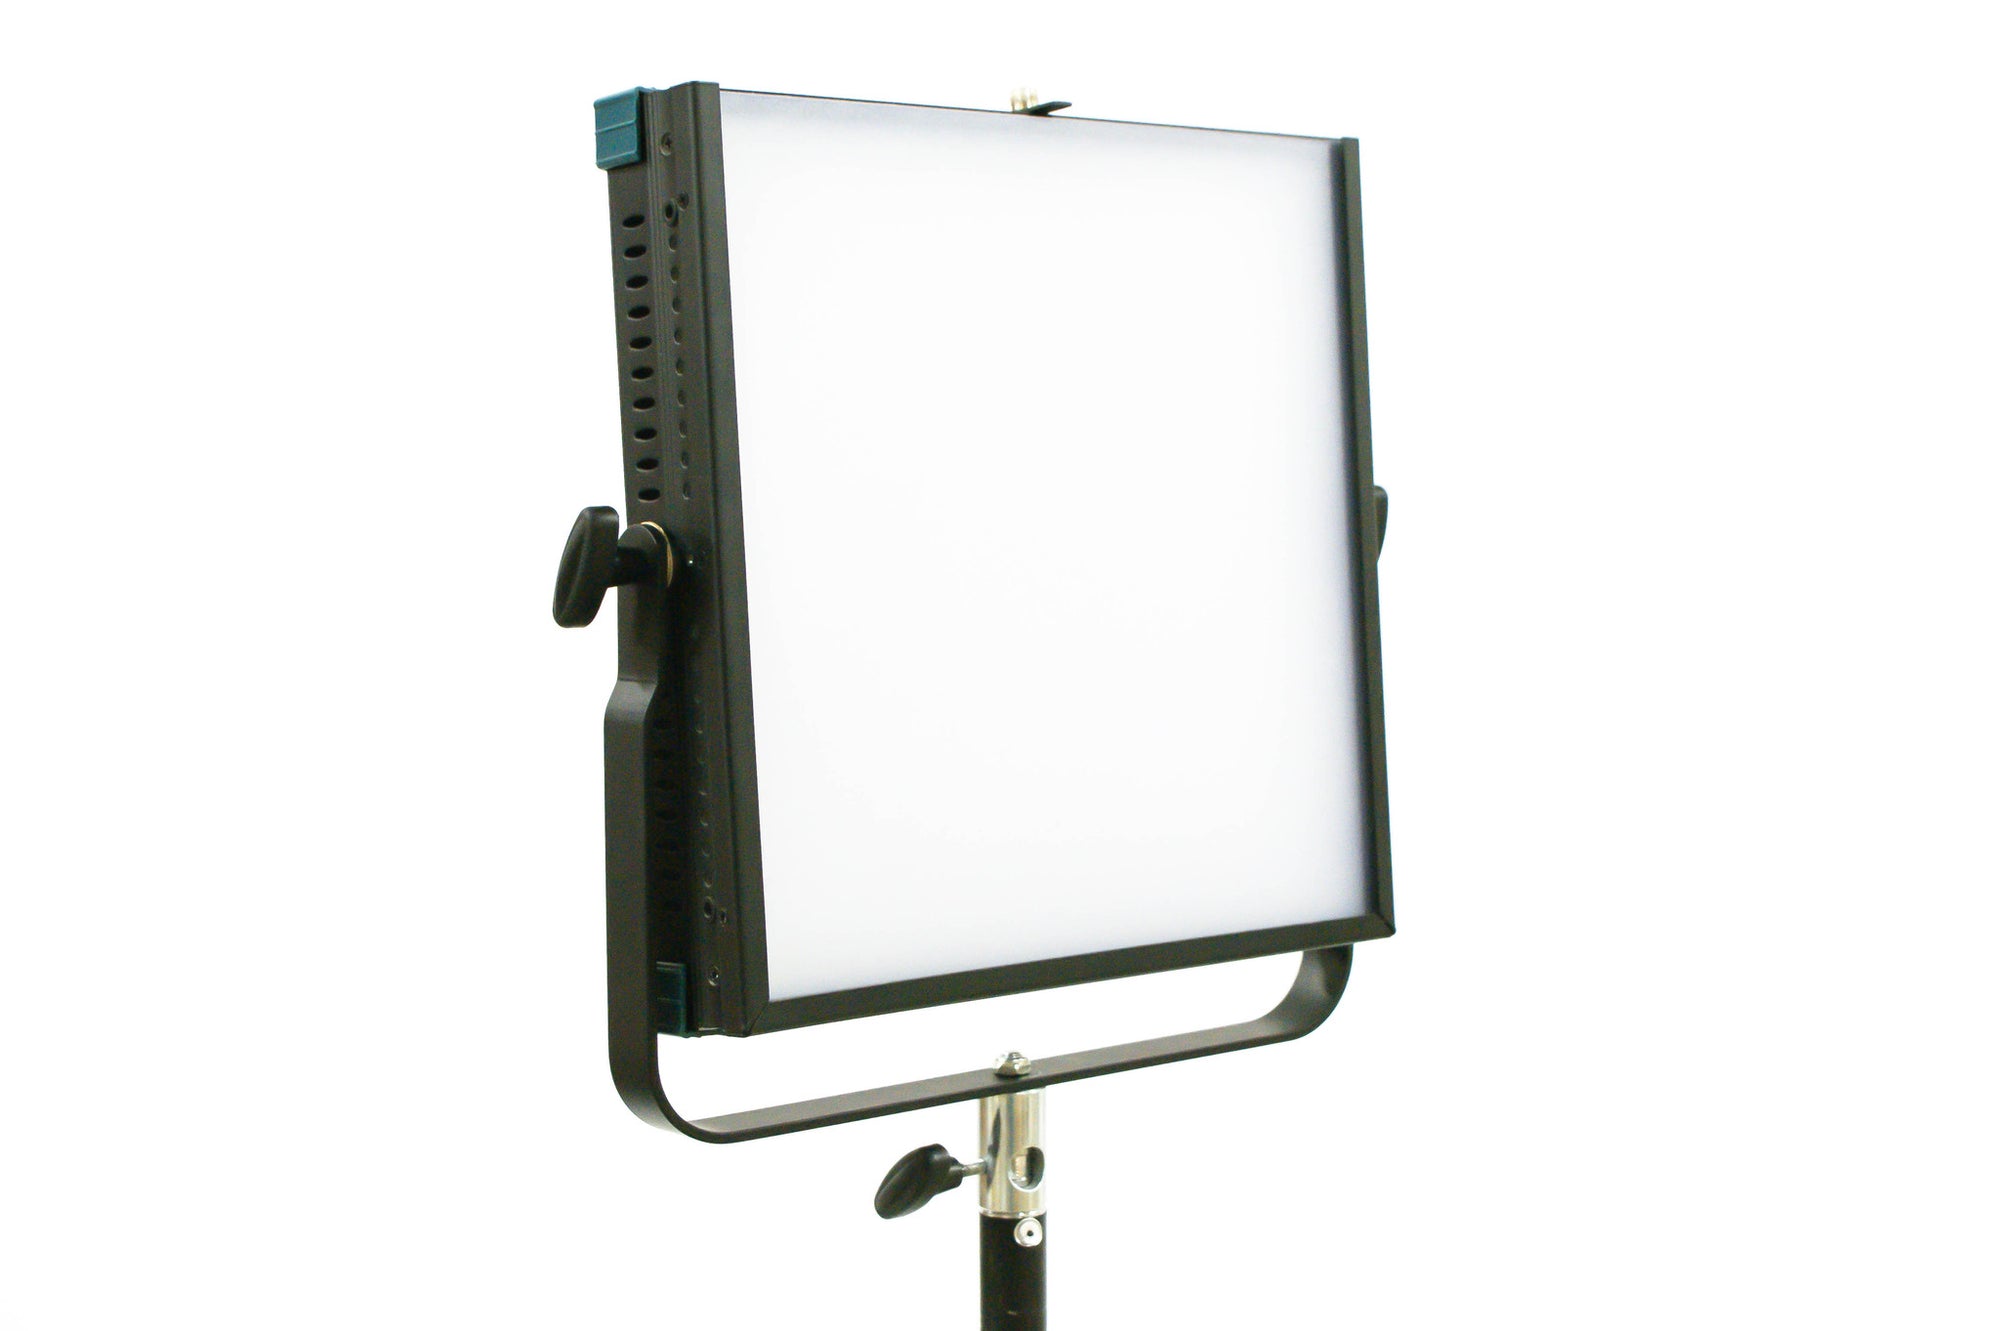 Three Light Kit - 1x1 Intellytech Panels, 50W & 100W With Batteries (gold mount or v-mount) for video